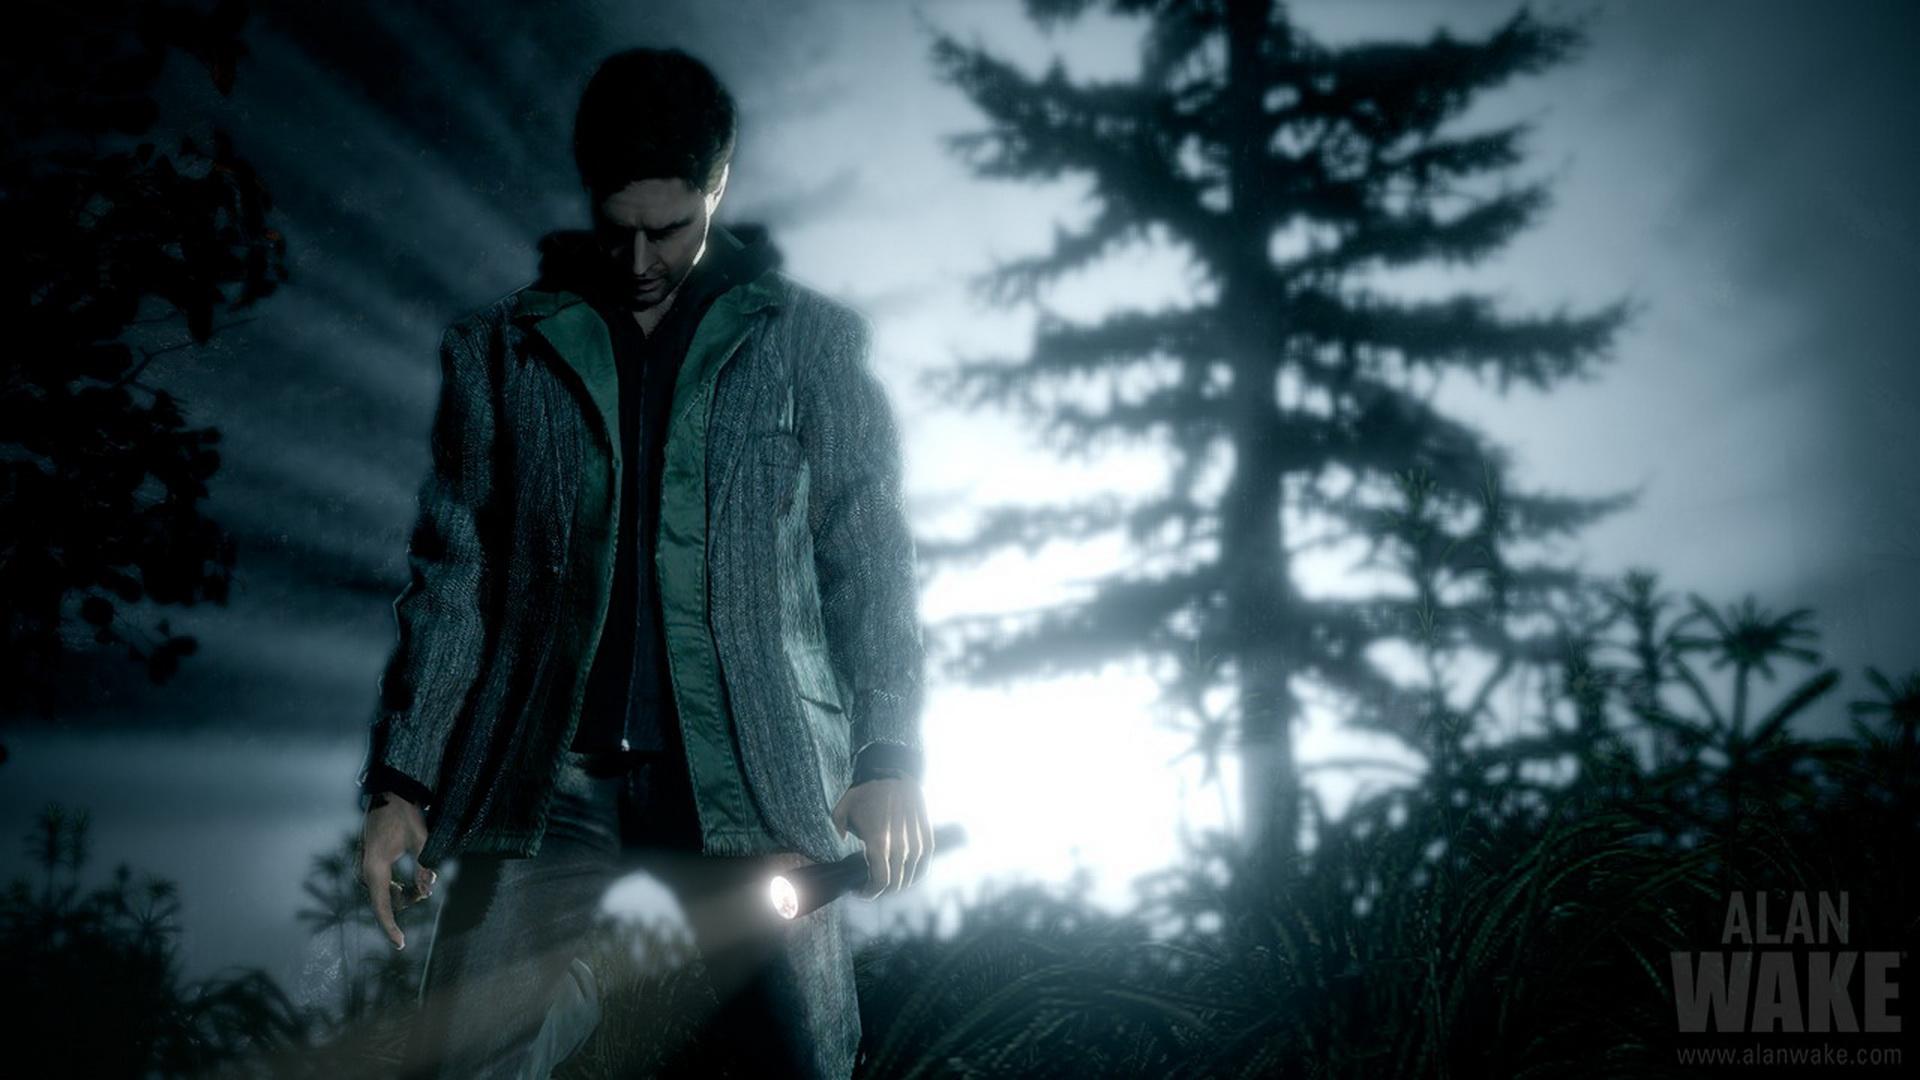 An 'Alan Wake' 4K remaster is coming to PlayStation, Xbox and PC this fall